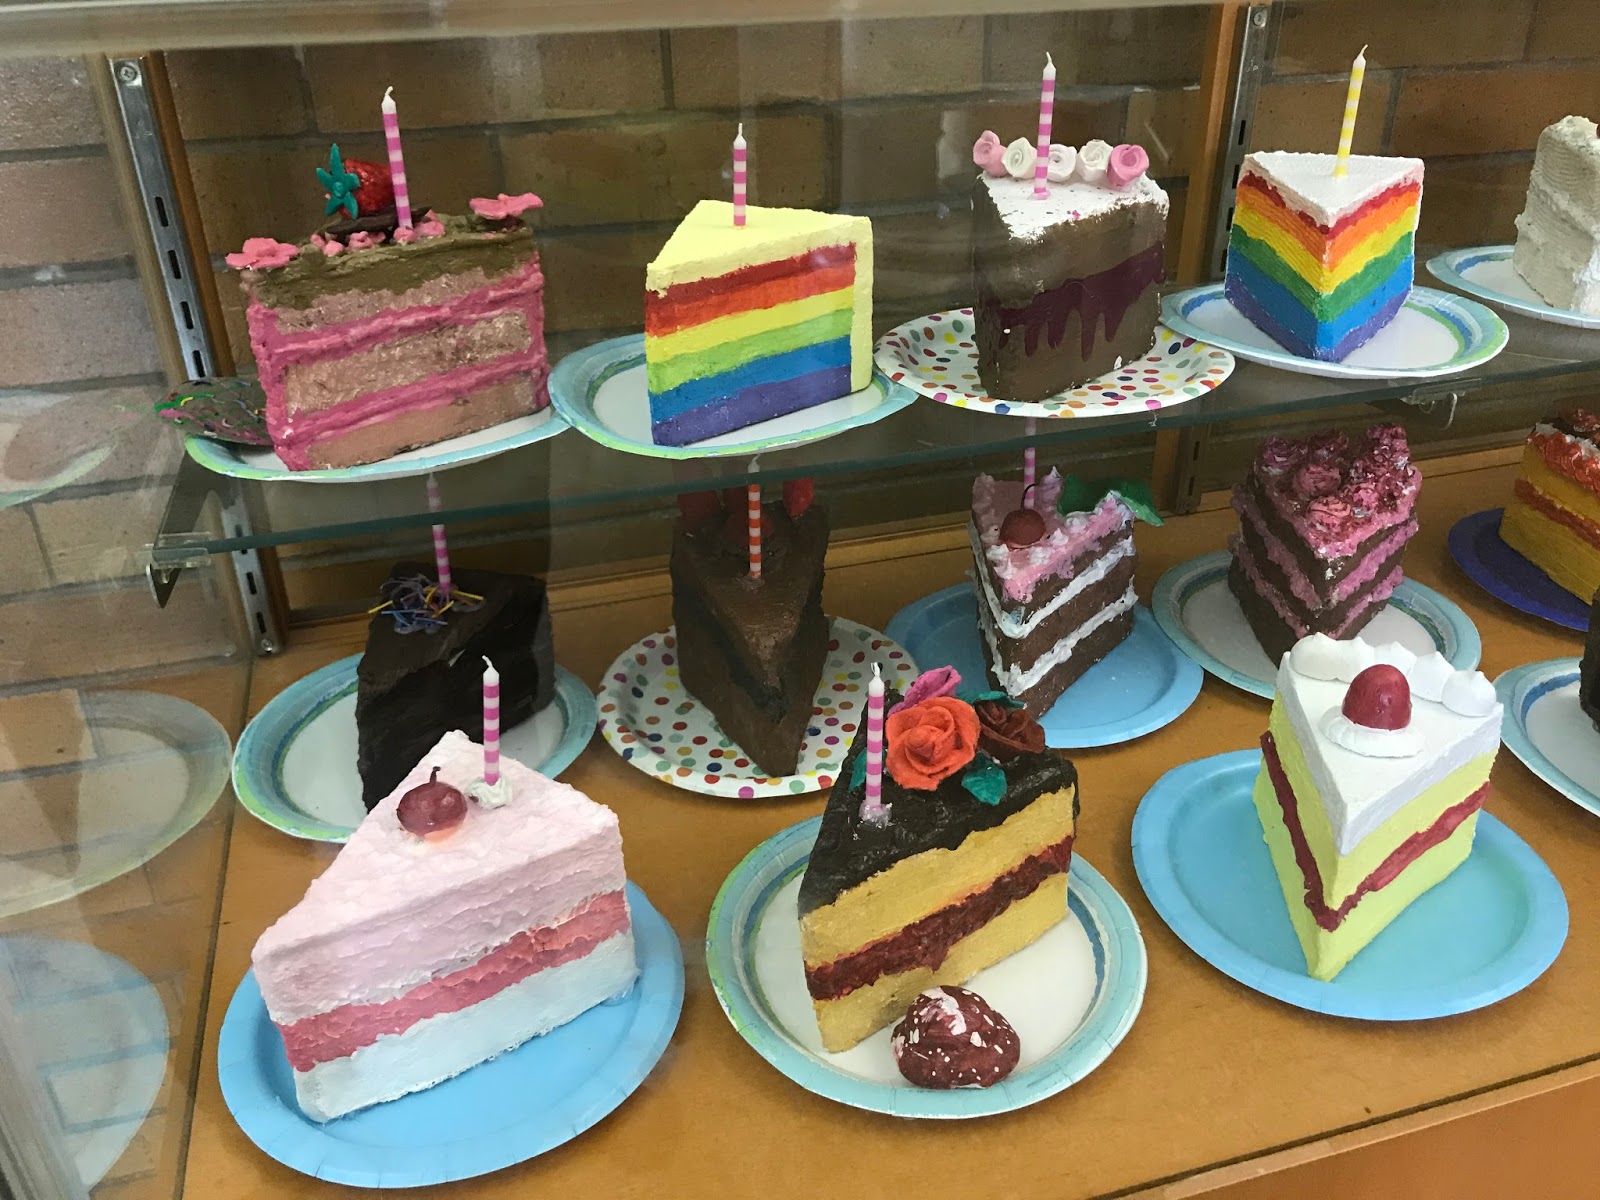 Cake Sculpture, Miniature Style, Art Projects for Kids